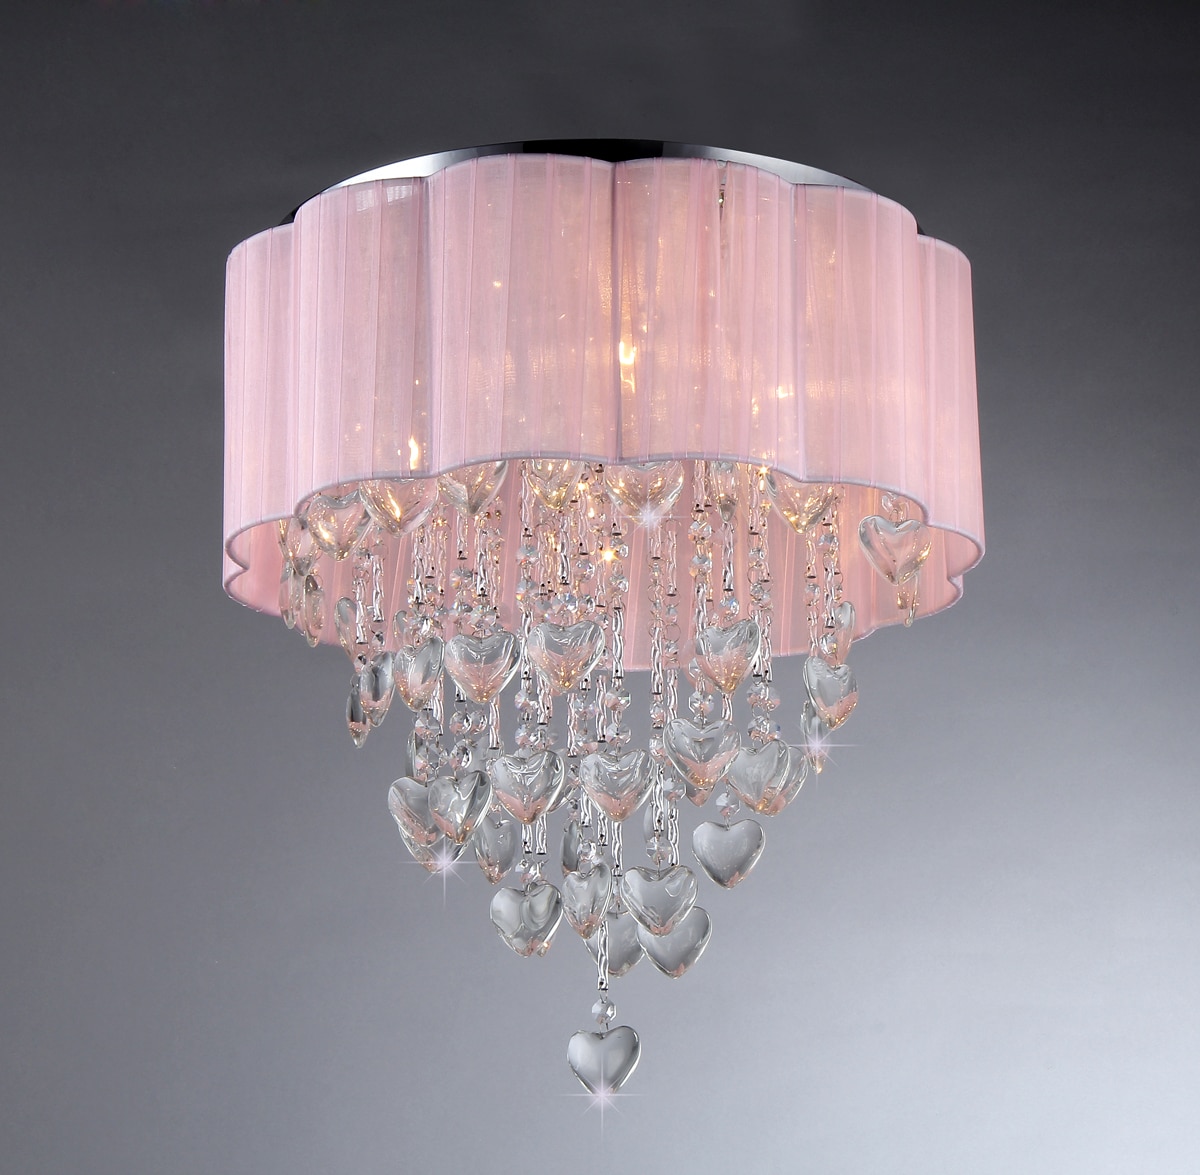 Home Accessories Inc 4-Light Pink Traditional Dry rated Chandelier